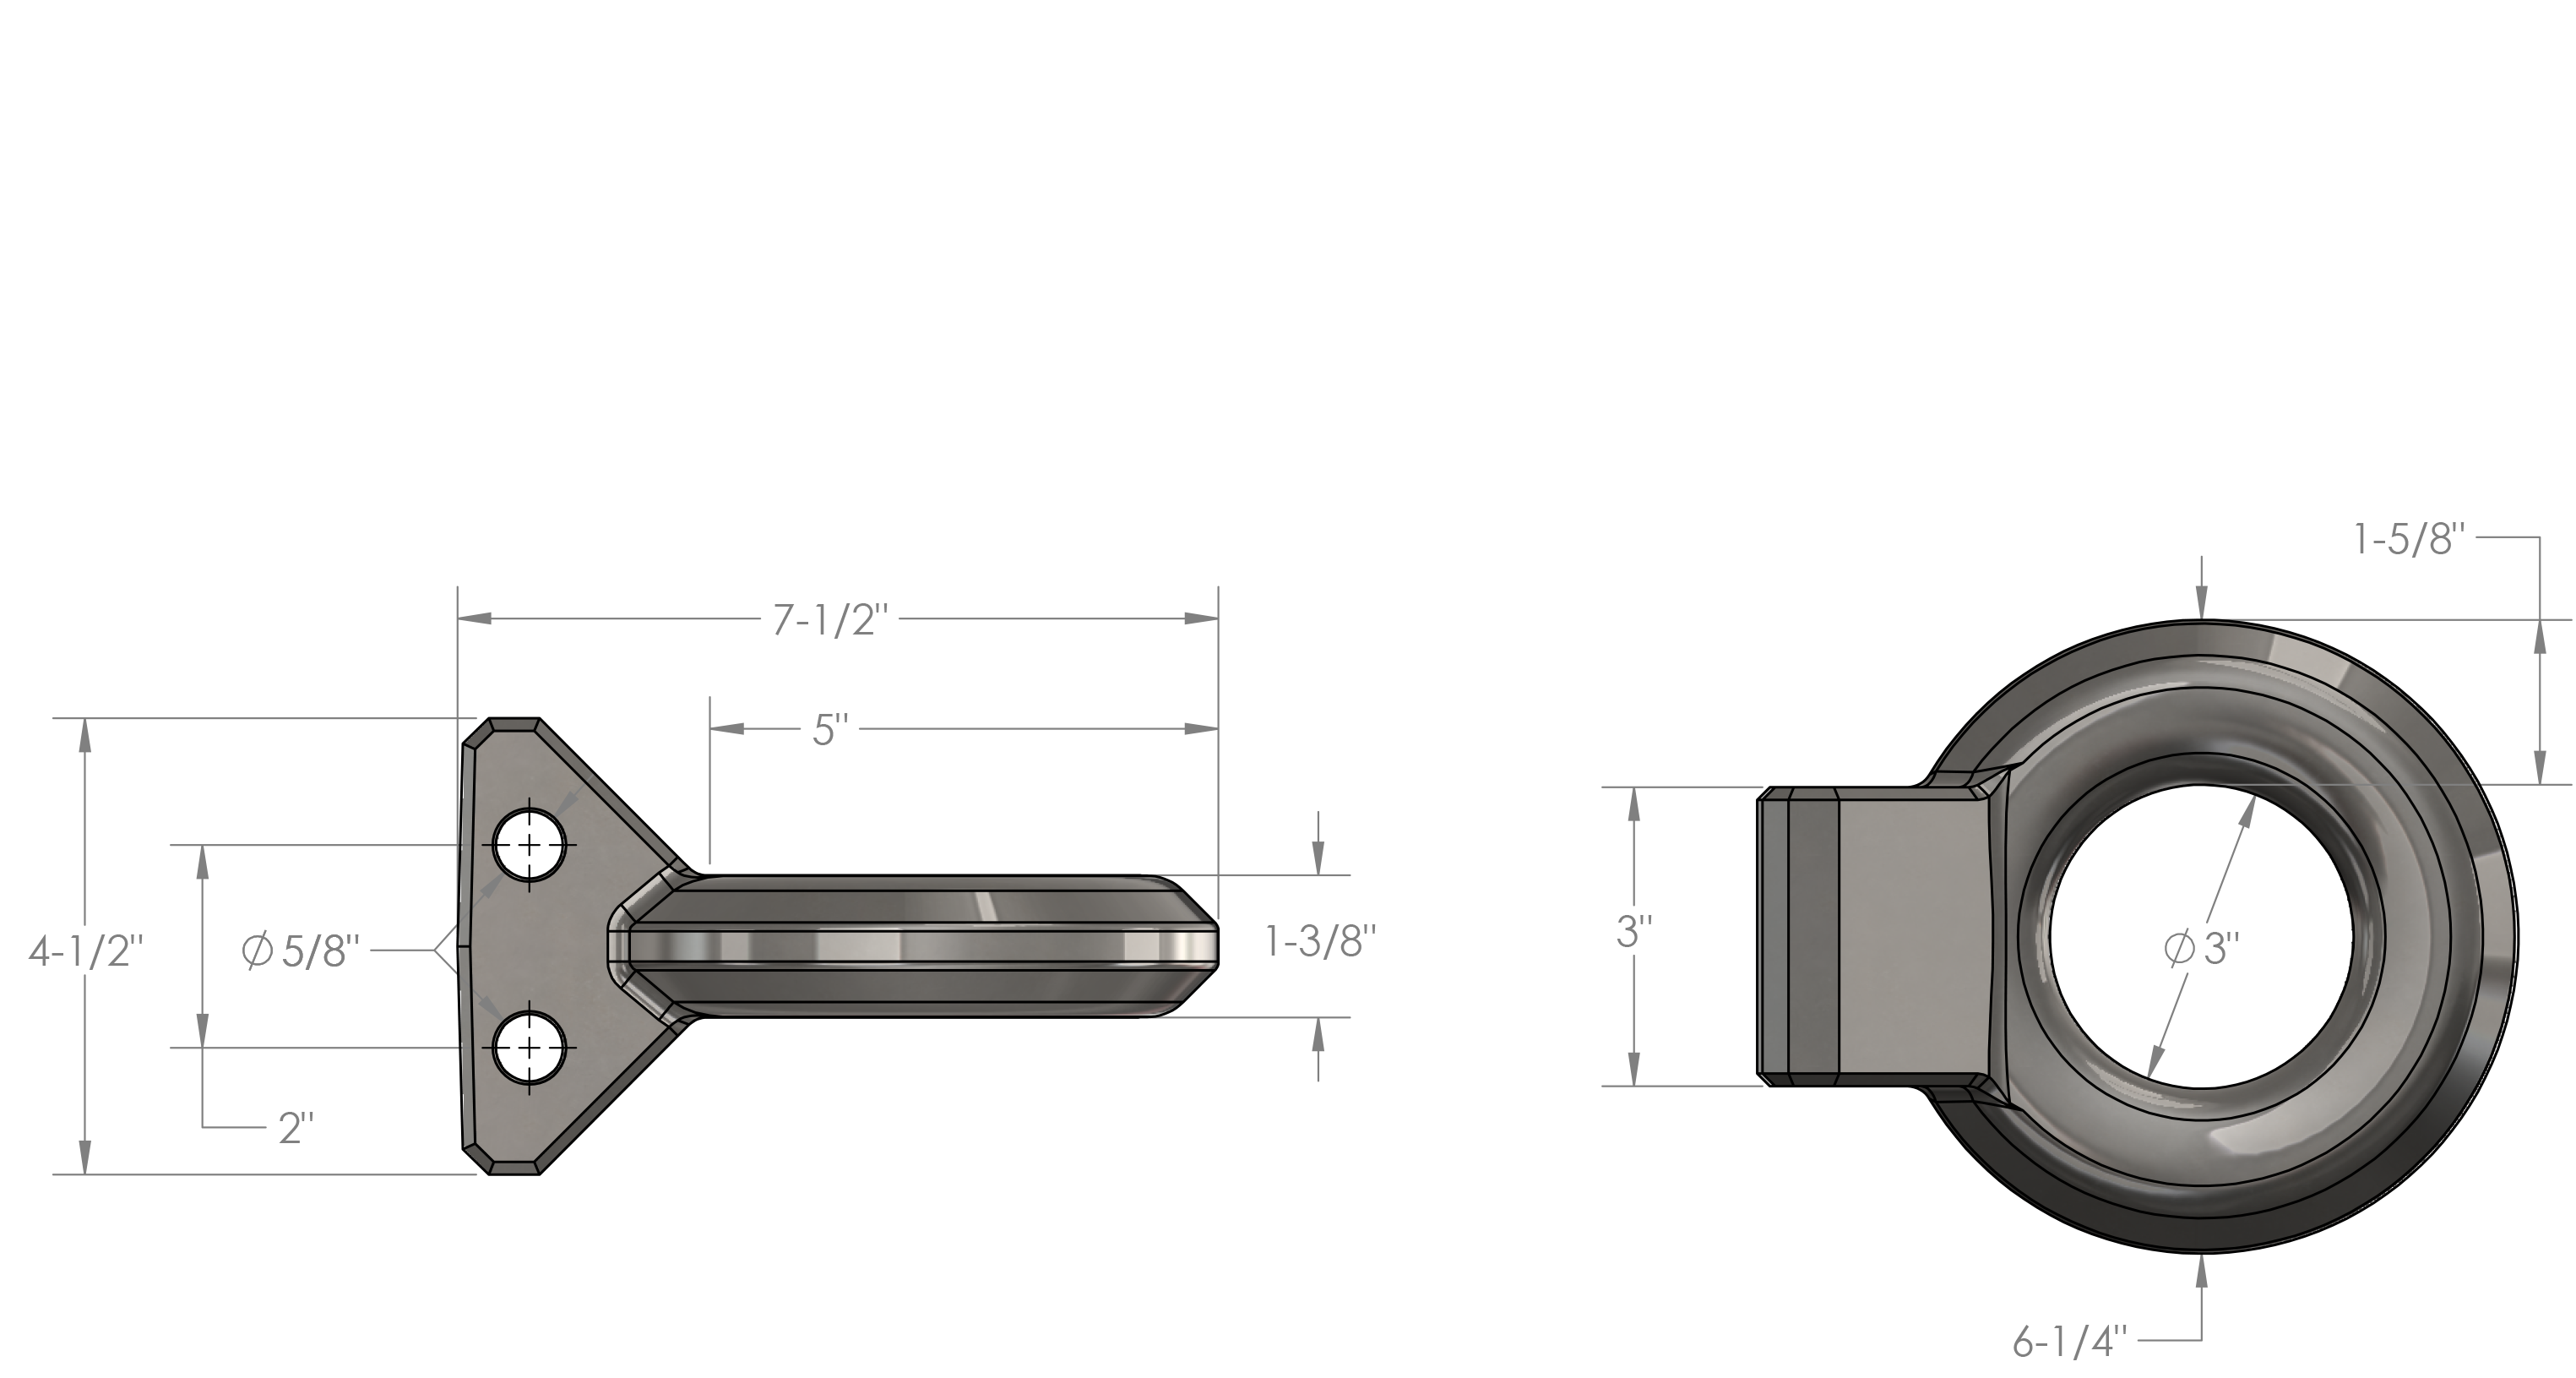 BulletProof Loop (Lunette Ring) Attachment Design Specification